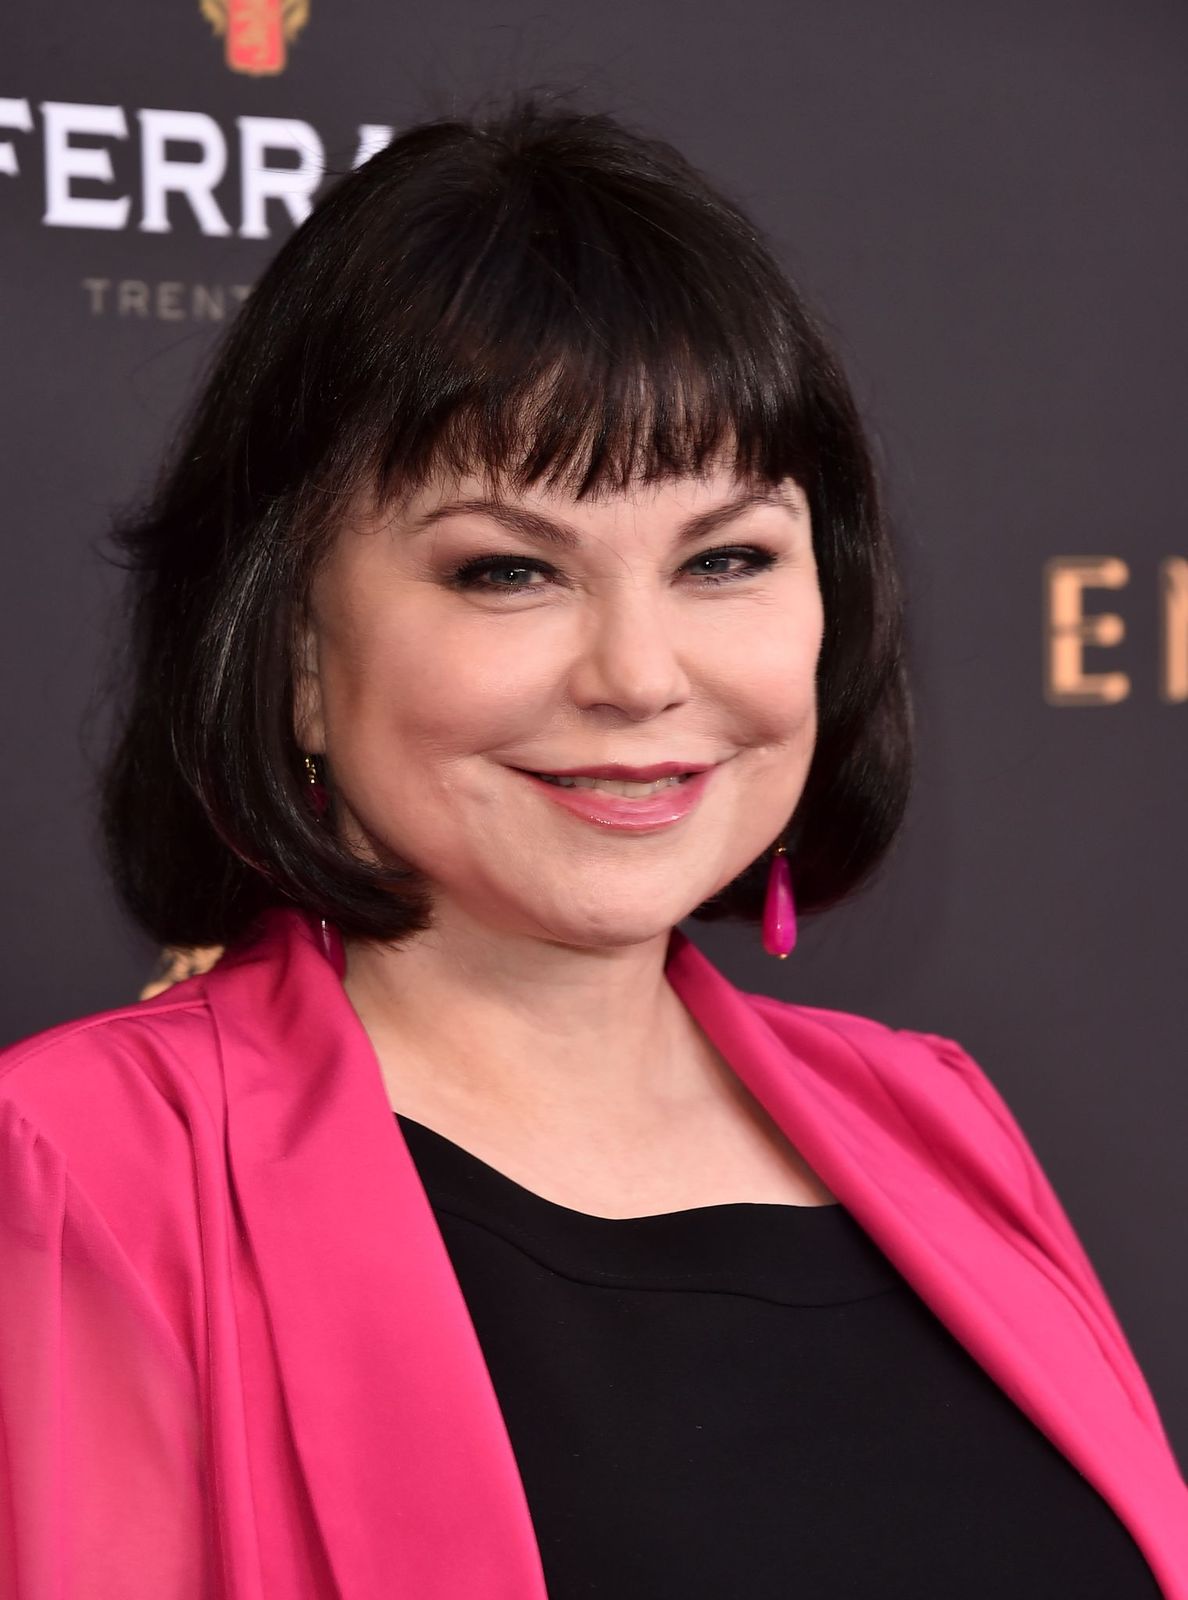  Actress Delta Burke attends the Television Academy's Performers Peer Group Celebration at The Montage Beverly Hills on August 21, 2017 in Beverly Hills, California | Source: Getty Images